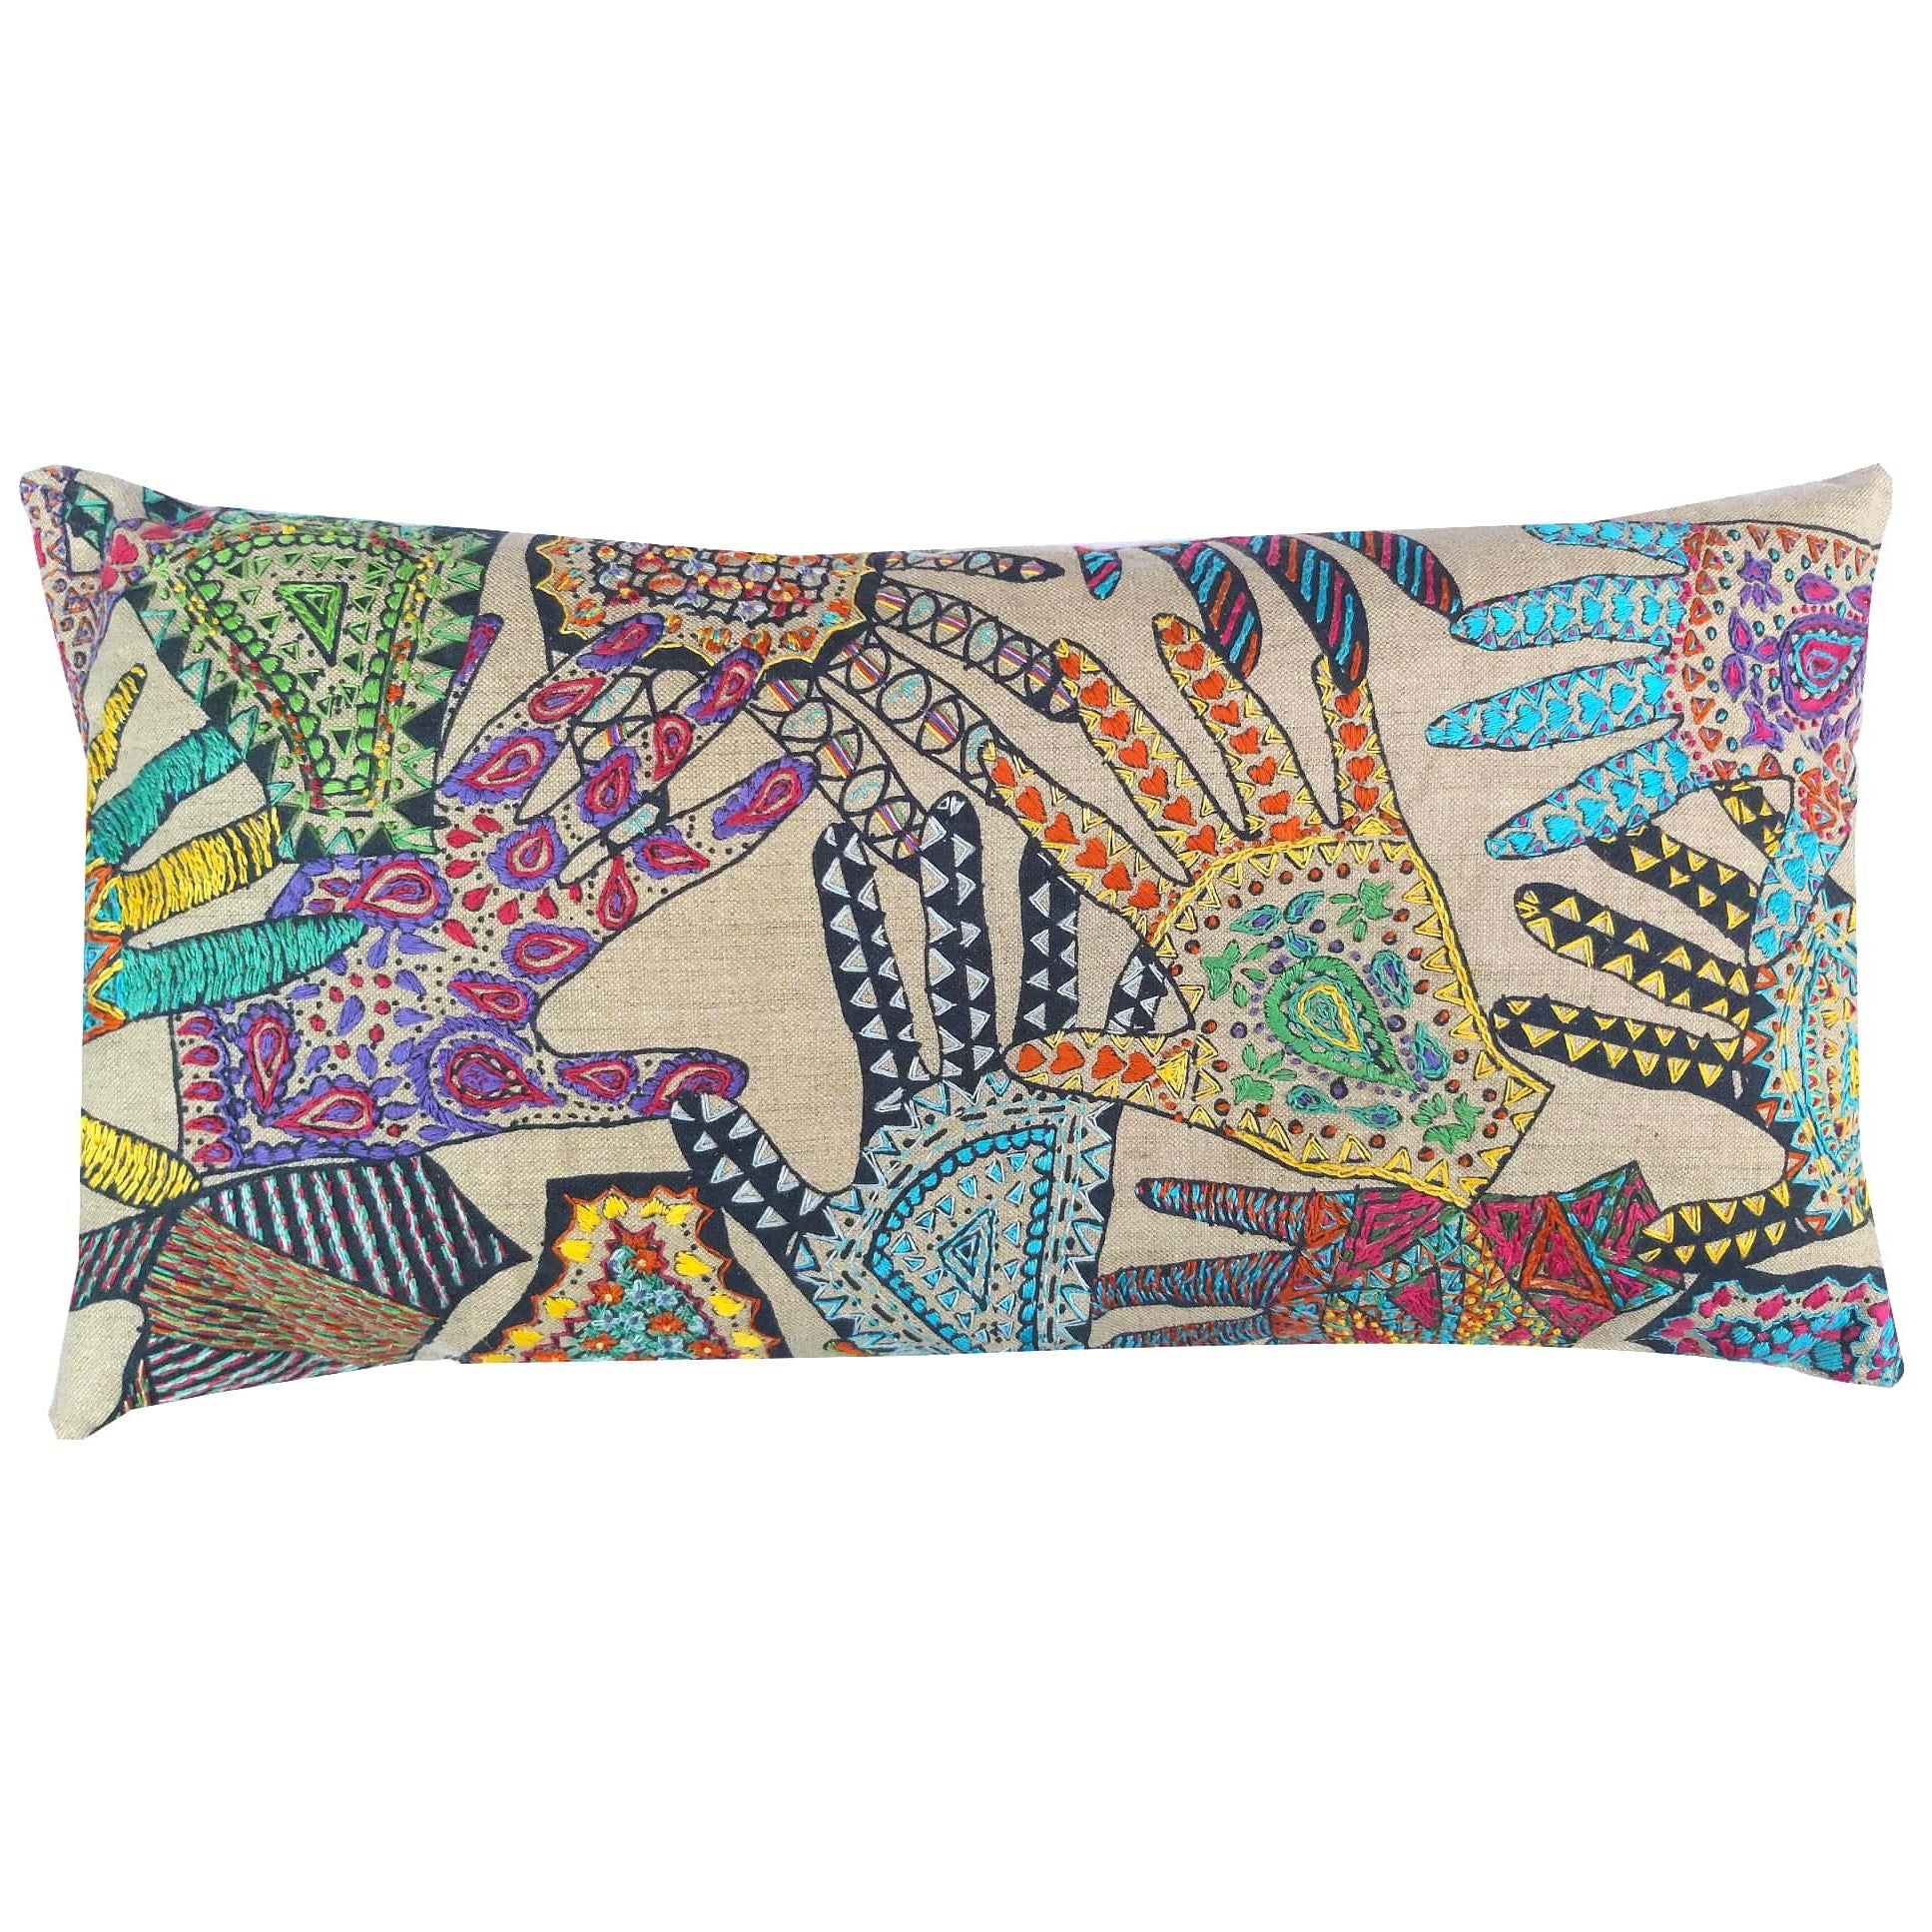 Hand-Embroidered-Hands-Cushion-Bright.jpg